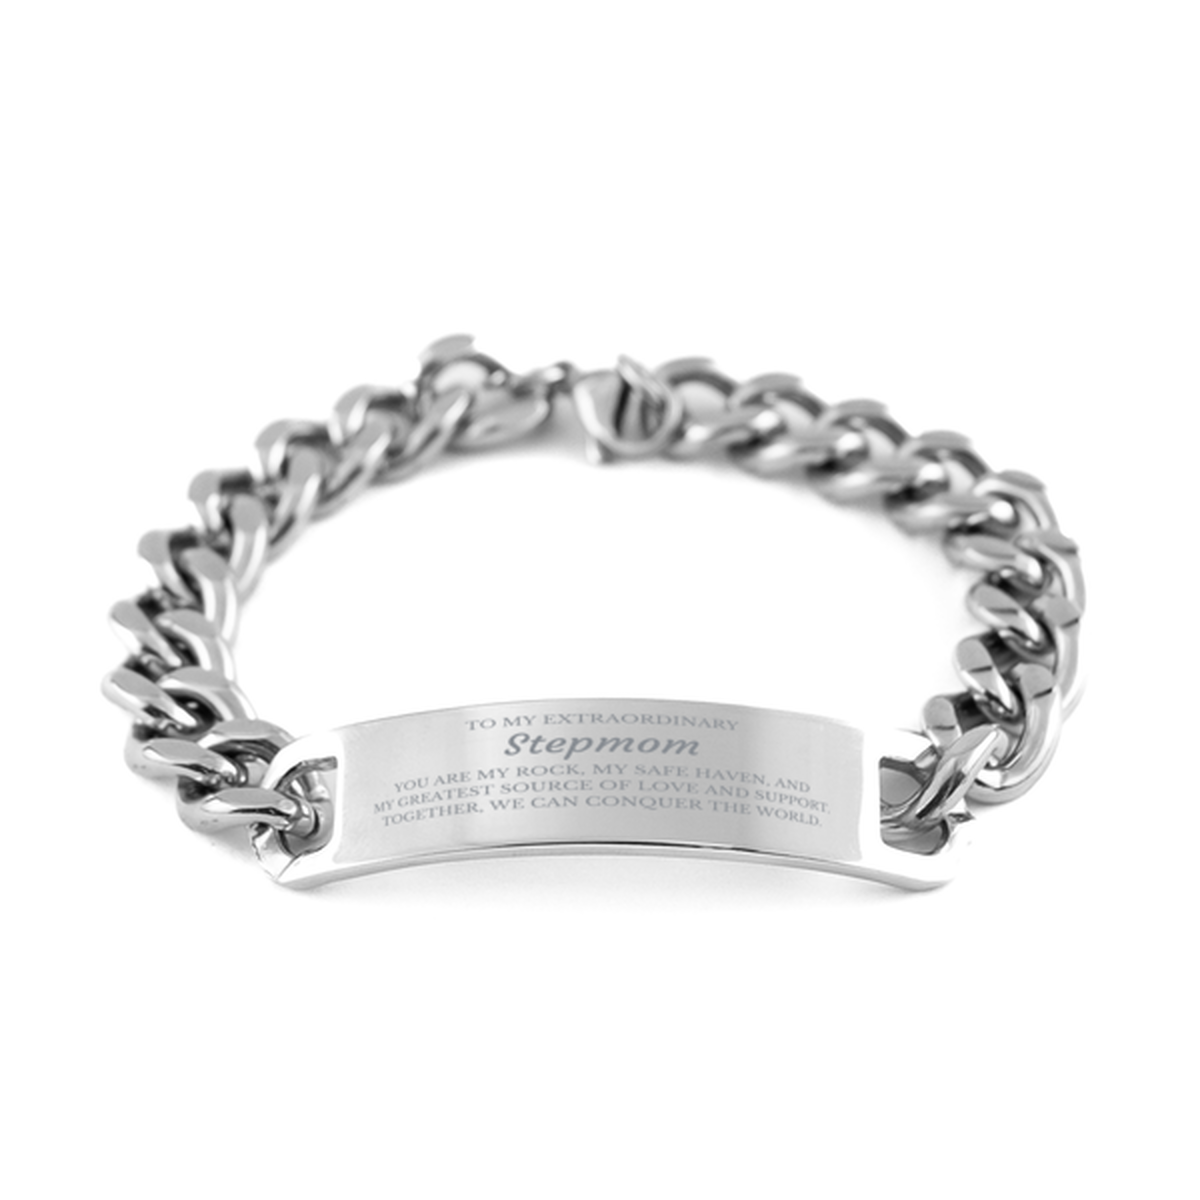 To My Extraordinary Stepmom Gifts, Together, we can conquer the world, Birthday Cuban Chain Stainless Steel Bracelet For Stepmom, Christmas Gifts For Stepmom